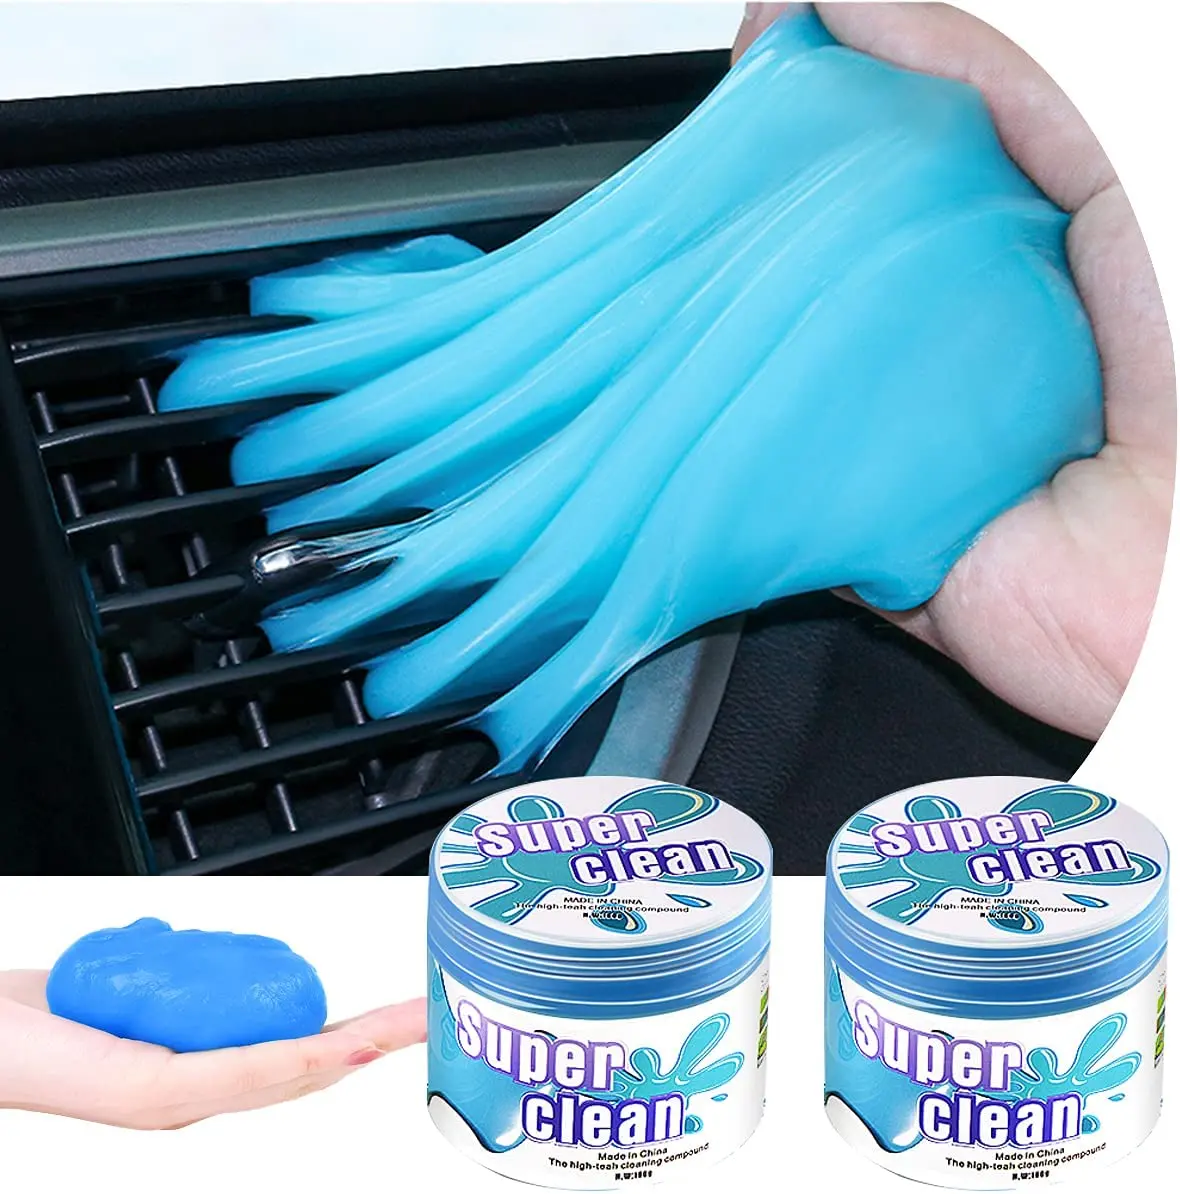 Cleaning gel Dust Cleaner for PC Keyboard Cleaning Car Laptop Dusting Home and Electronics Cleaning Kit 160g